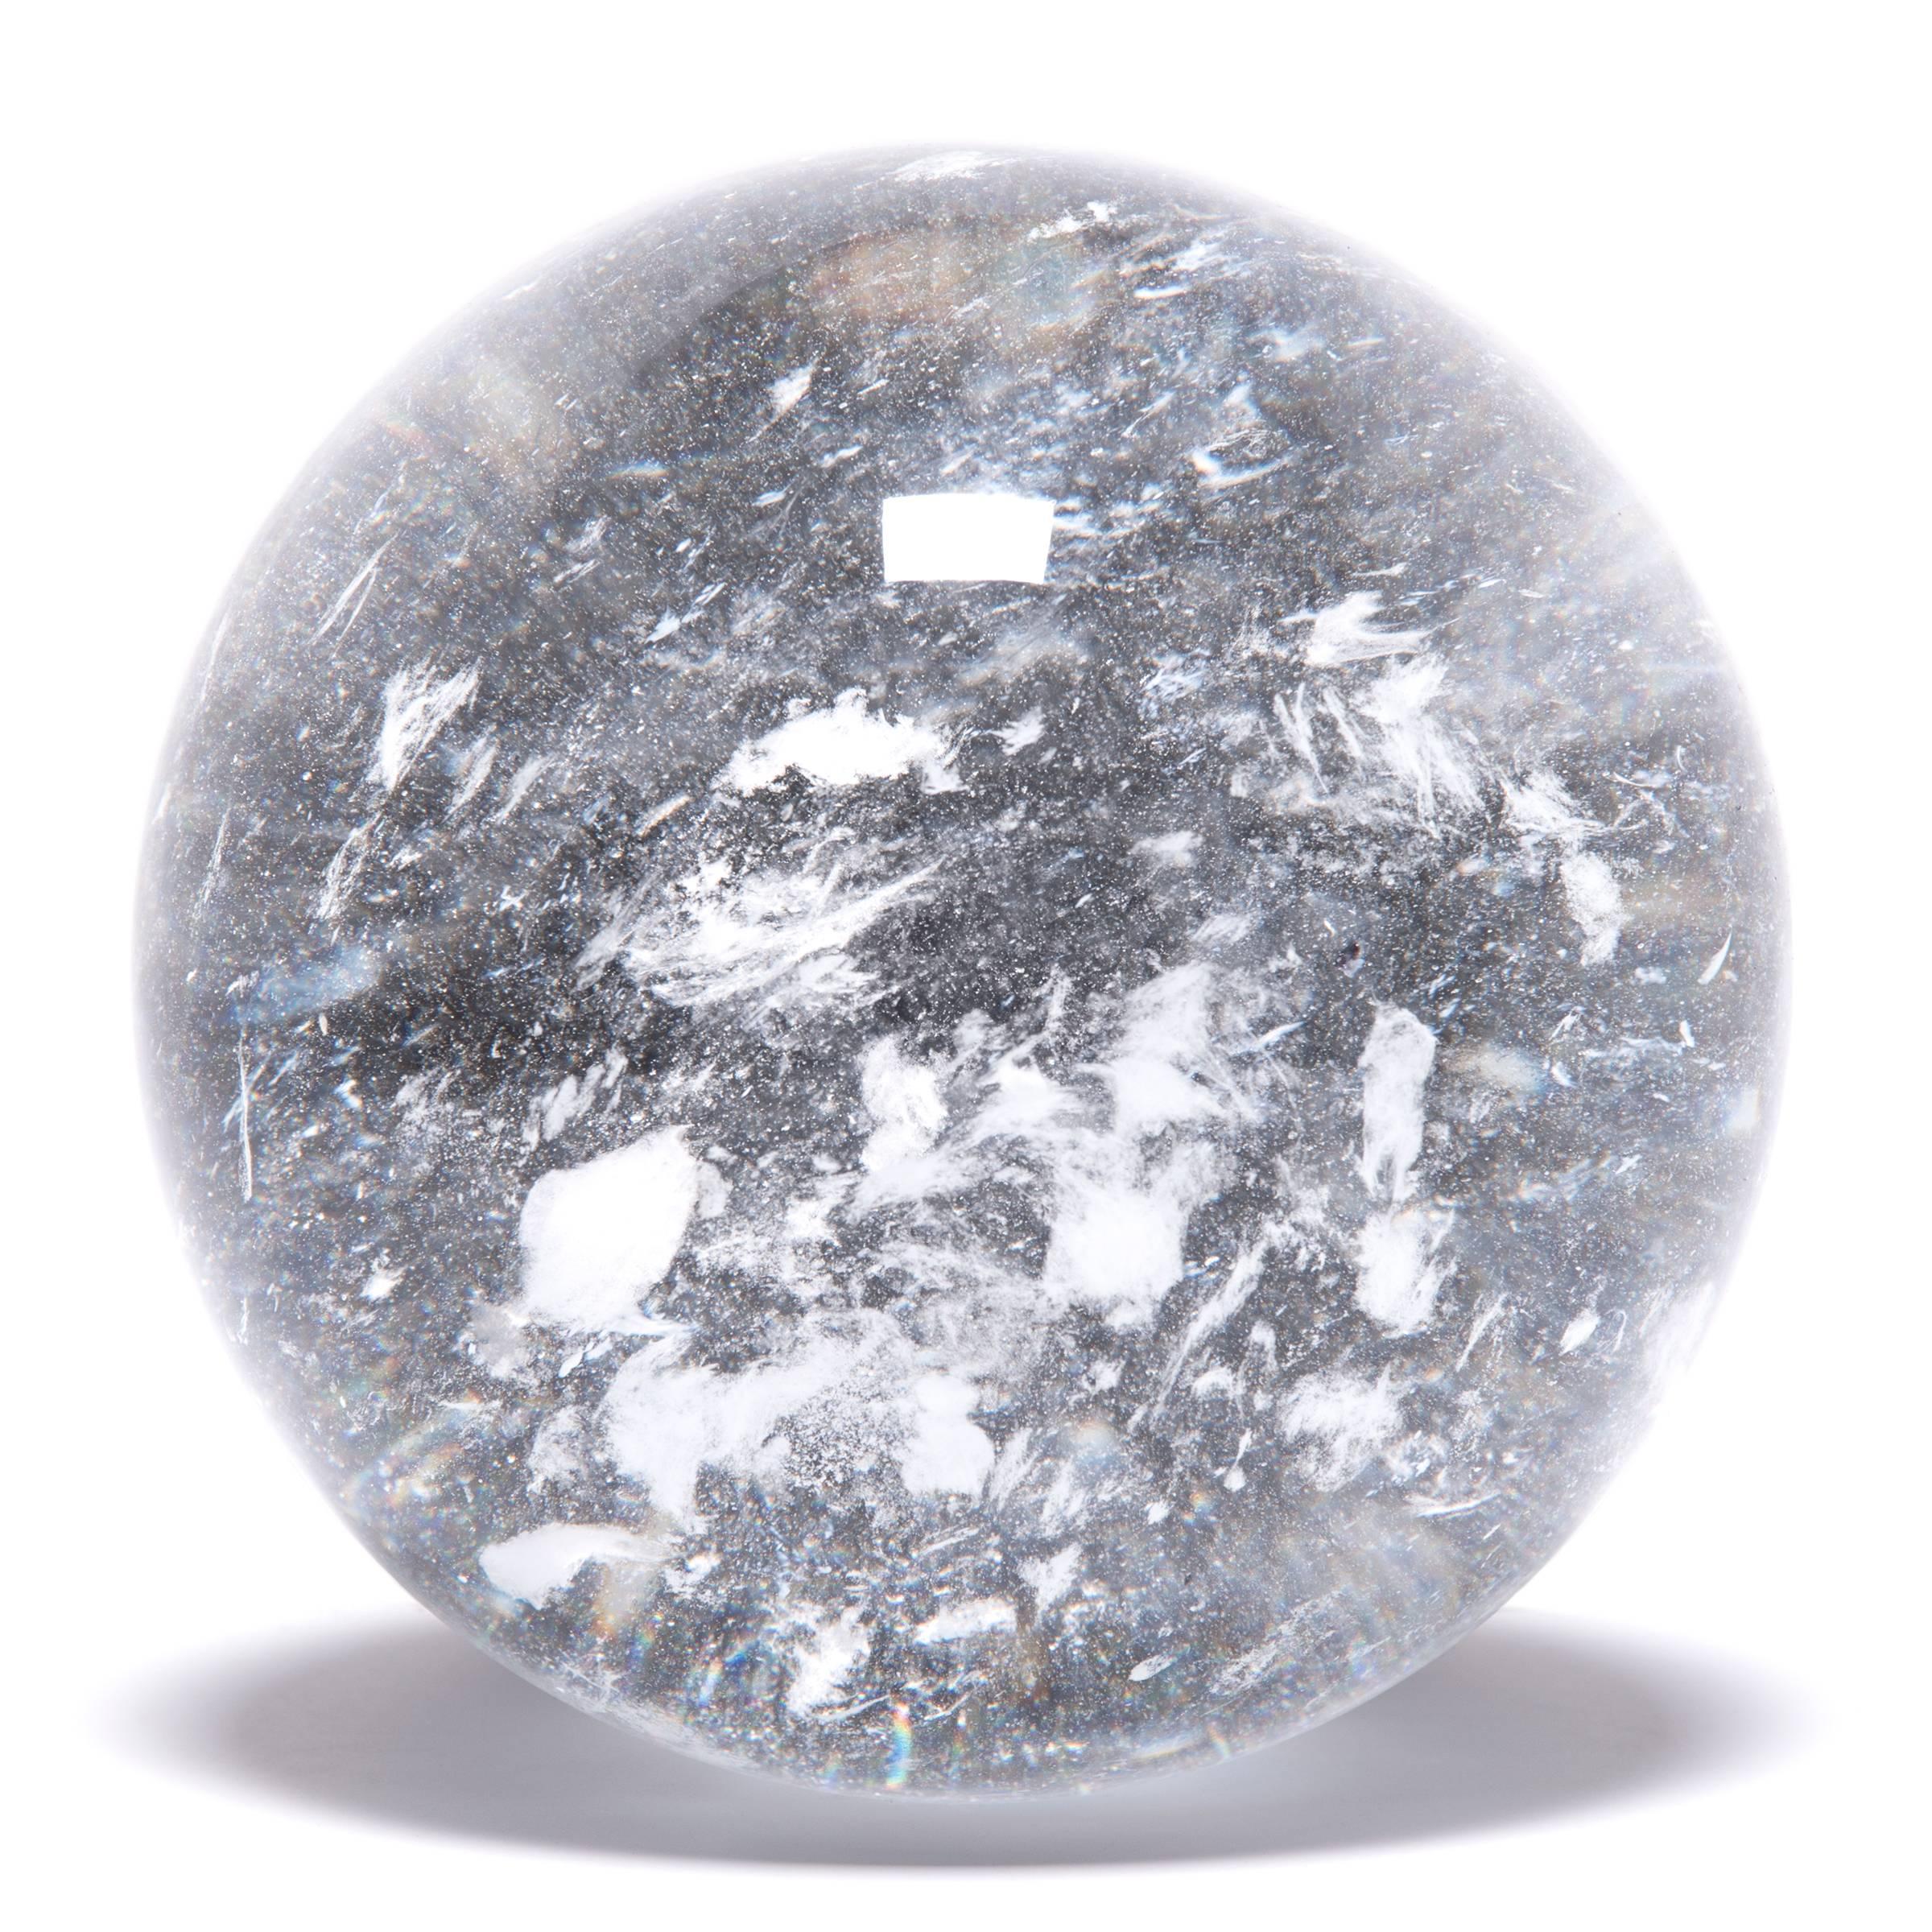 Gem lore is endless, and every culture has its own beliefs about specific stones tied to cultural history, geography, and spiritual practices. In China, some practitioners of Feng Shui value clear quartz, like this beautiful crystal ball, for its